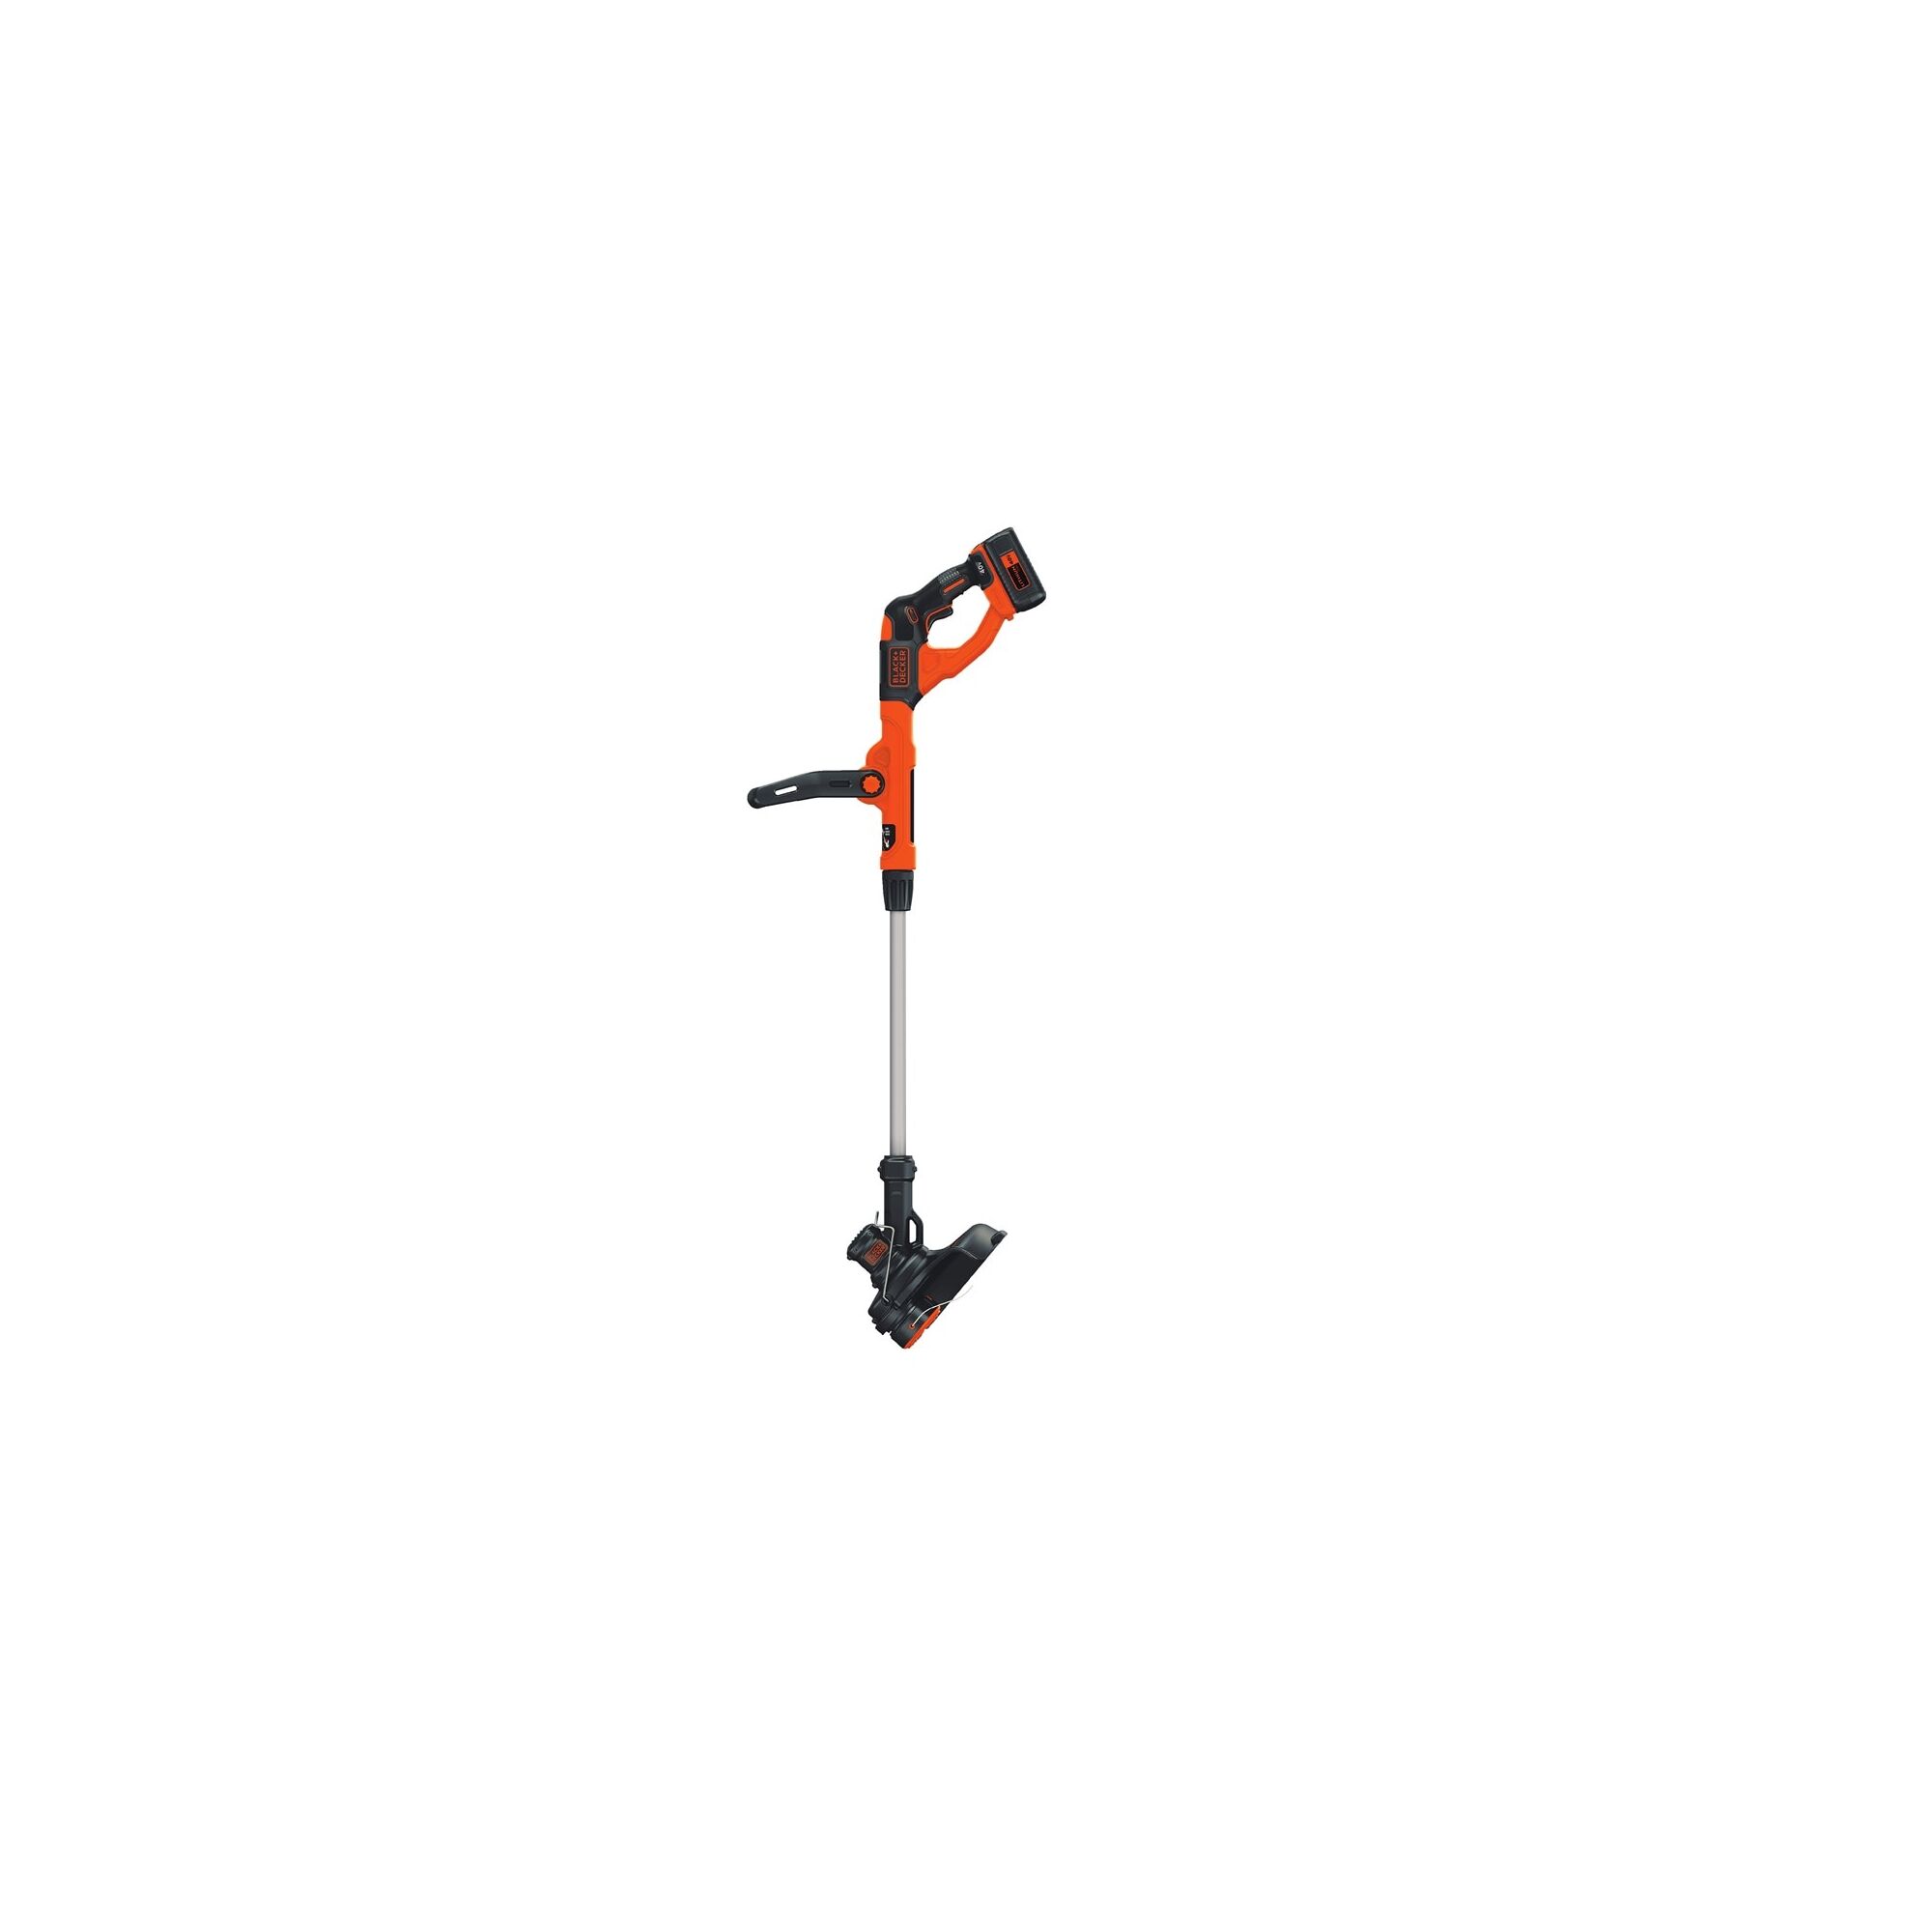 Profile of string trimmer